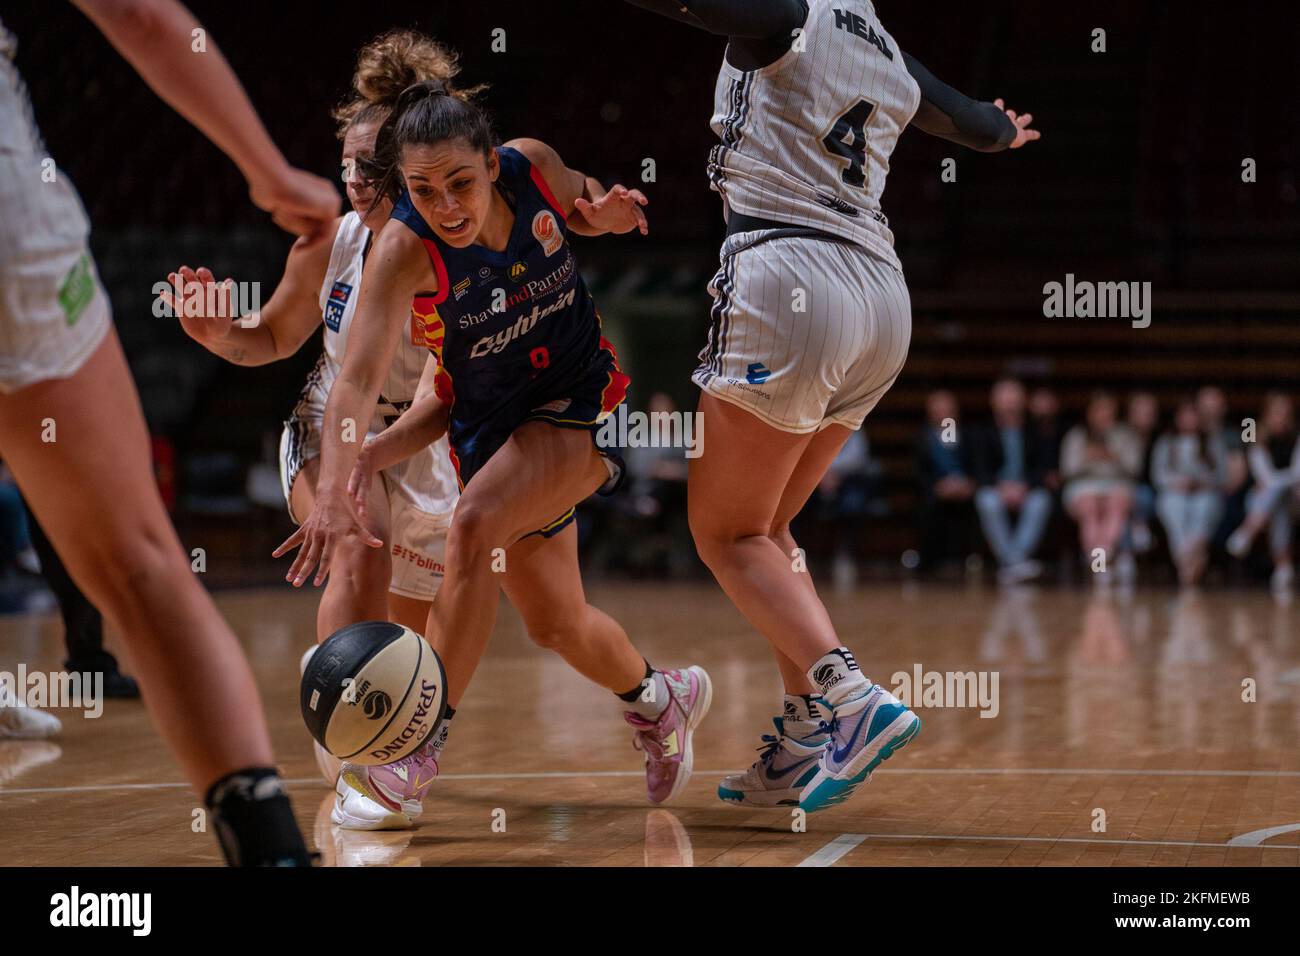 Adelaide, South Australia, November 19th 2022: Abby Cubillo (9 Adelaide Lightning) drives to the basket defended by Shyla Heal (4 Sydney Flames) during the Cygnett WNBL game between Adelaide Lightning and Sydney Flames at Adelaide 36ers Arena in Adelaide, Australia.  (Noe Llamas/SPP) Stock Photo